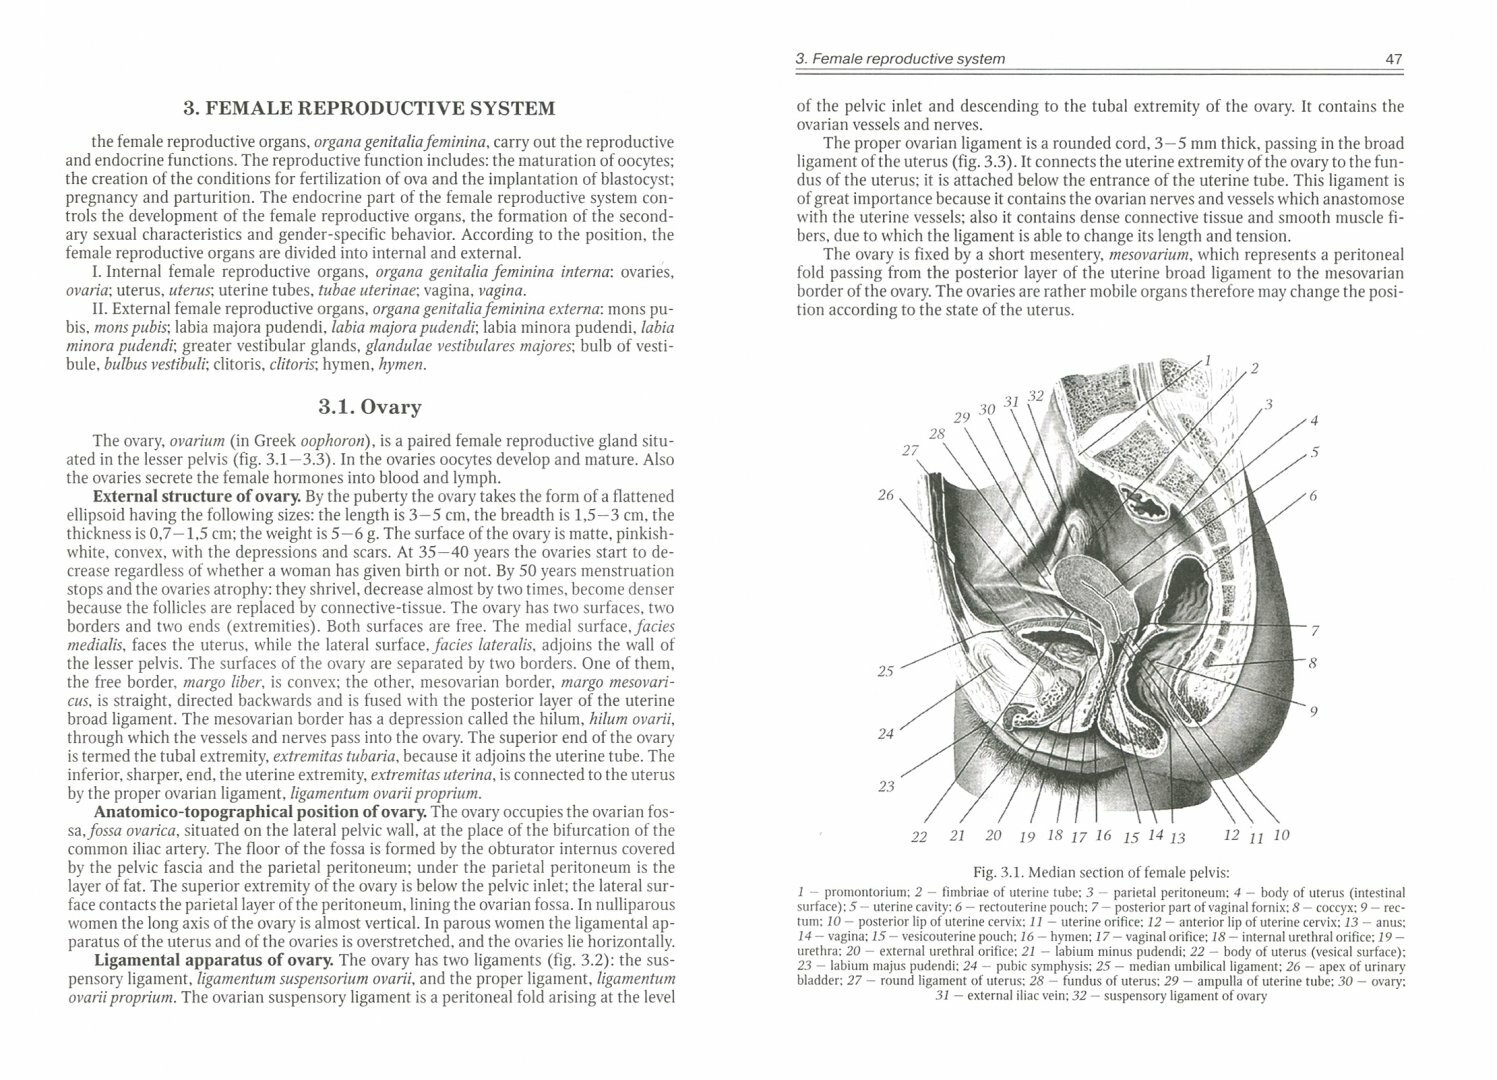 Urogenital System. The manual for medical students - фото №3